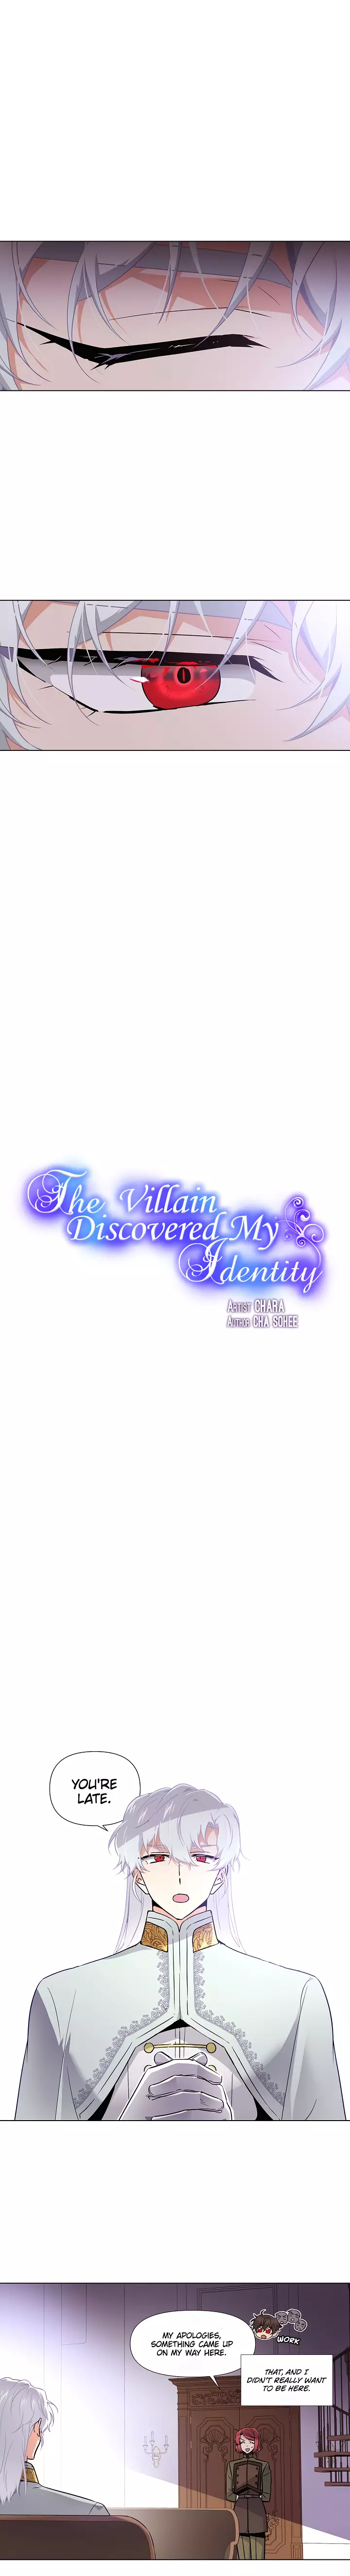 The Villain Discovered My Identity - 21 page 3